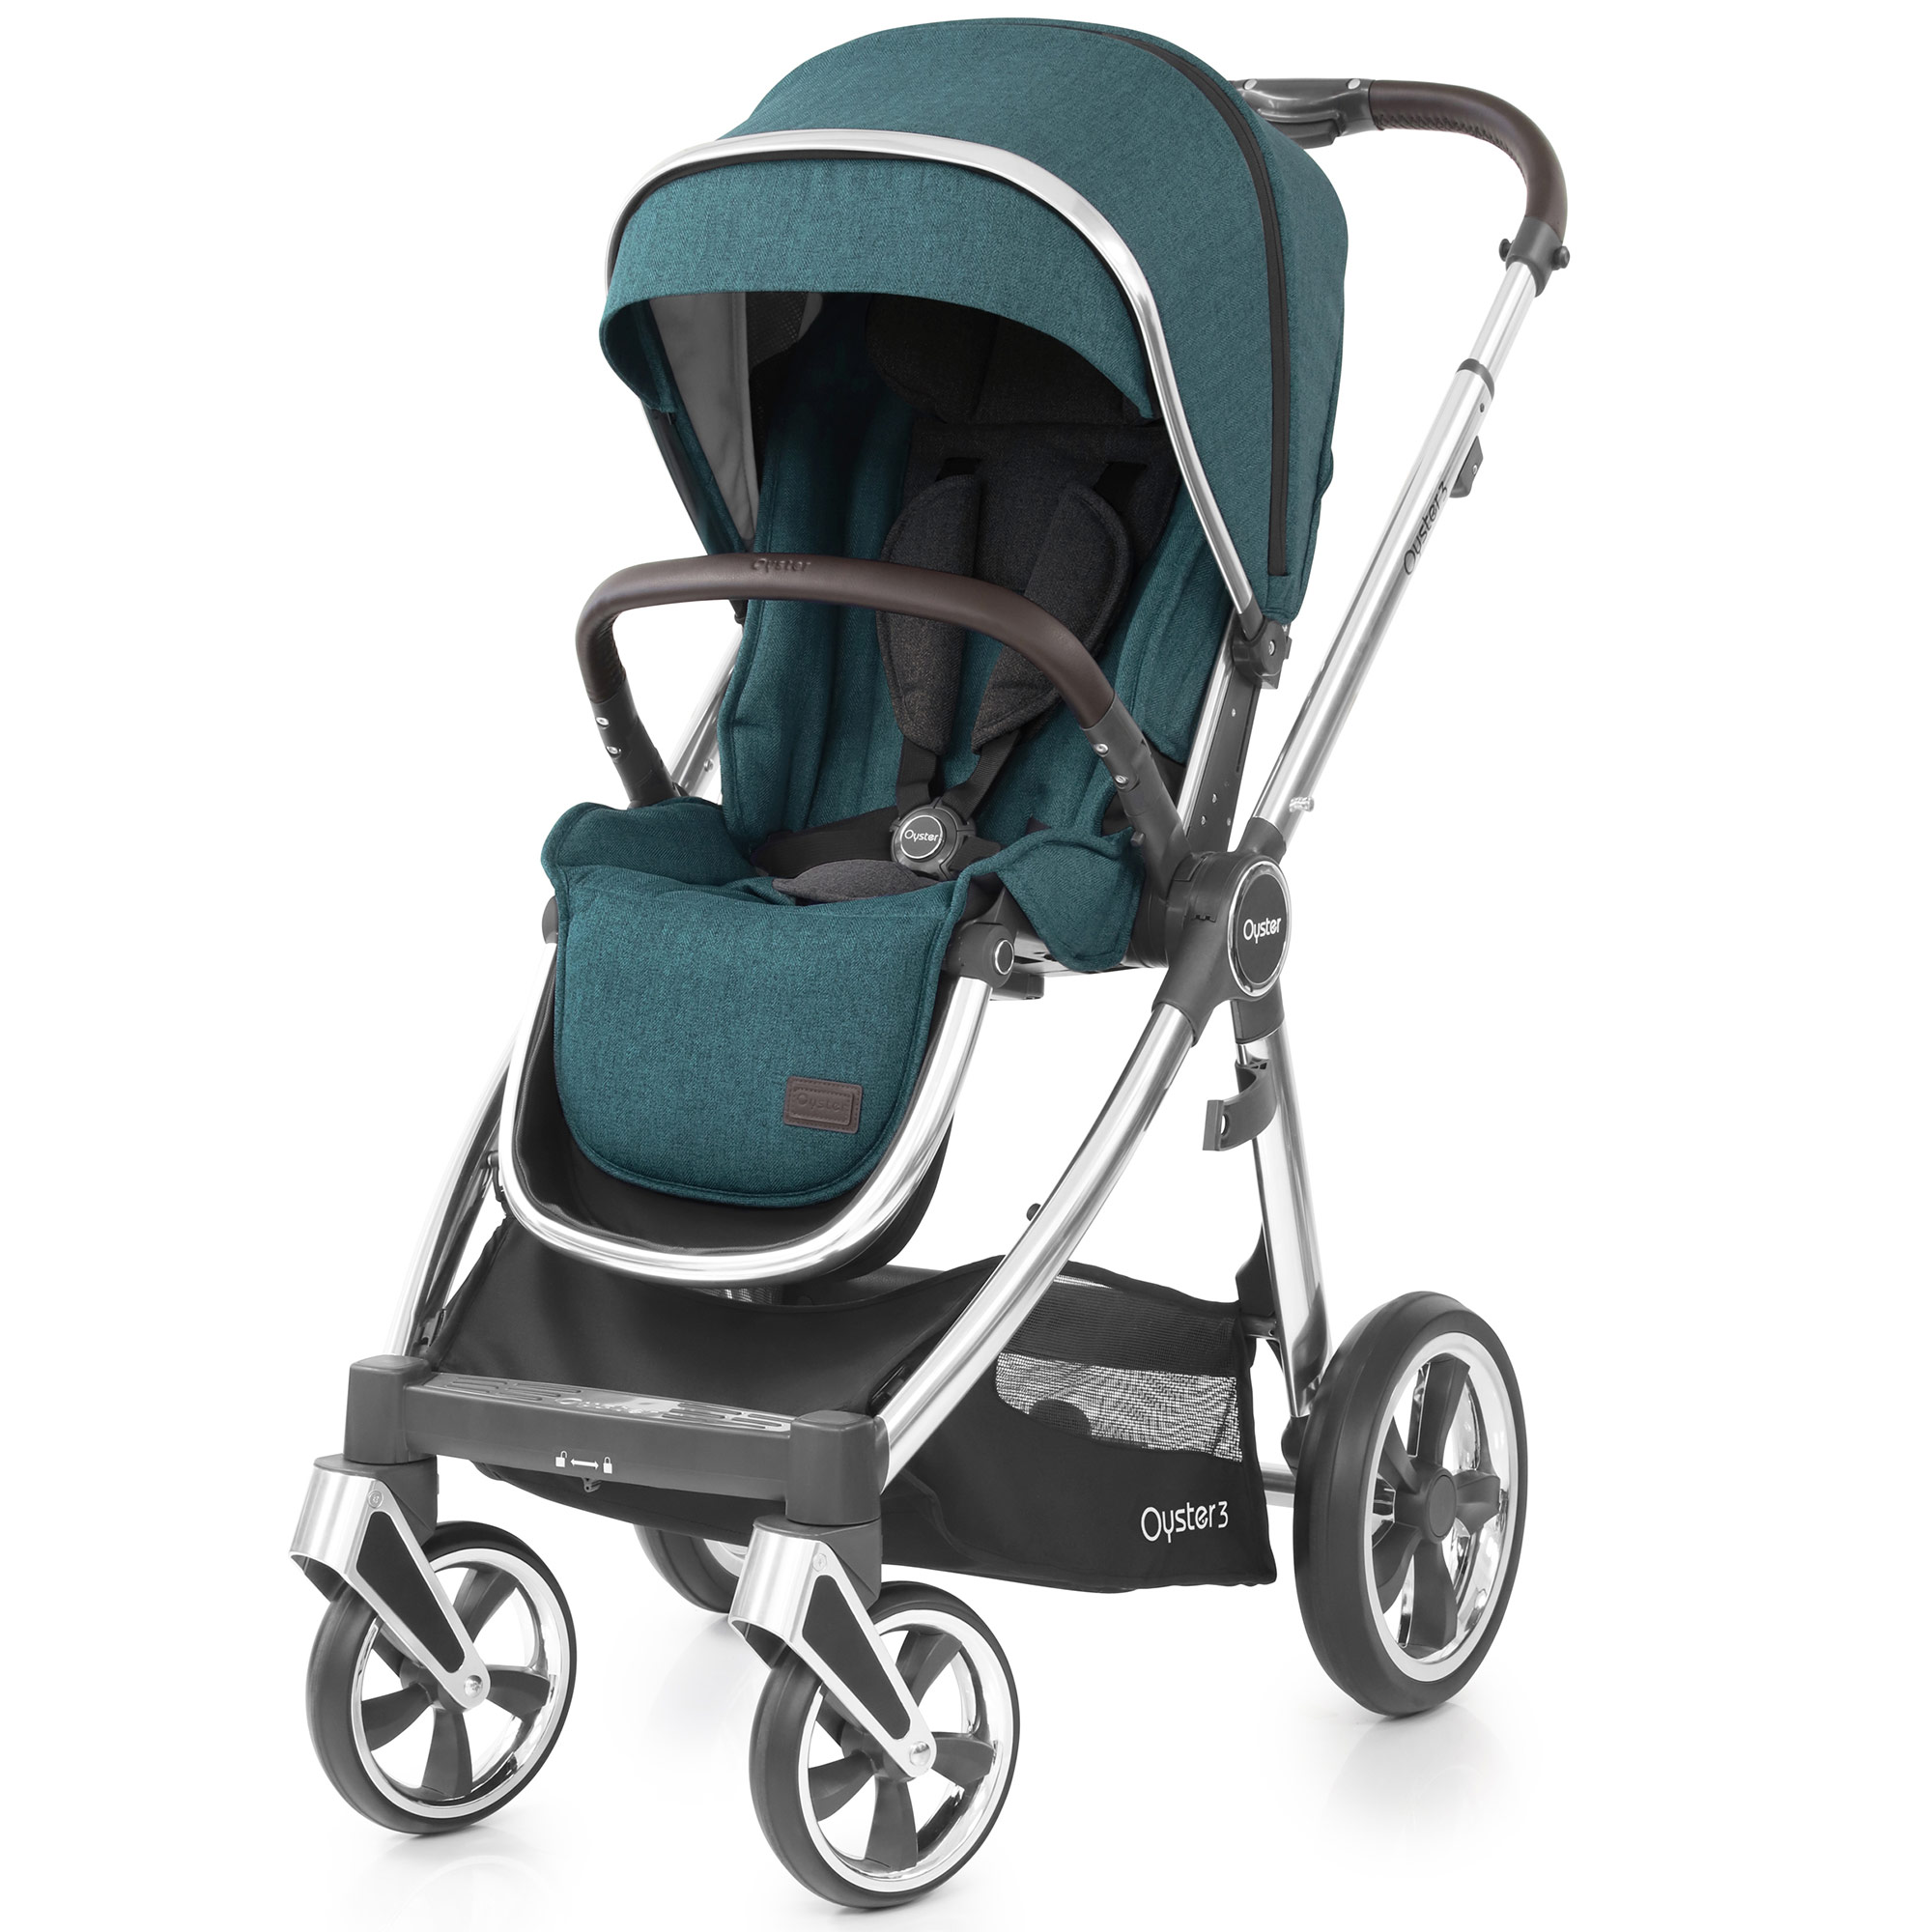 oyster pushchair 3 in 1